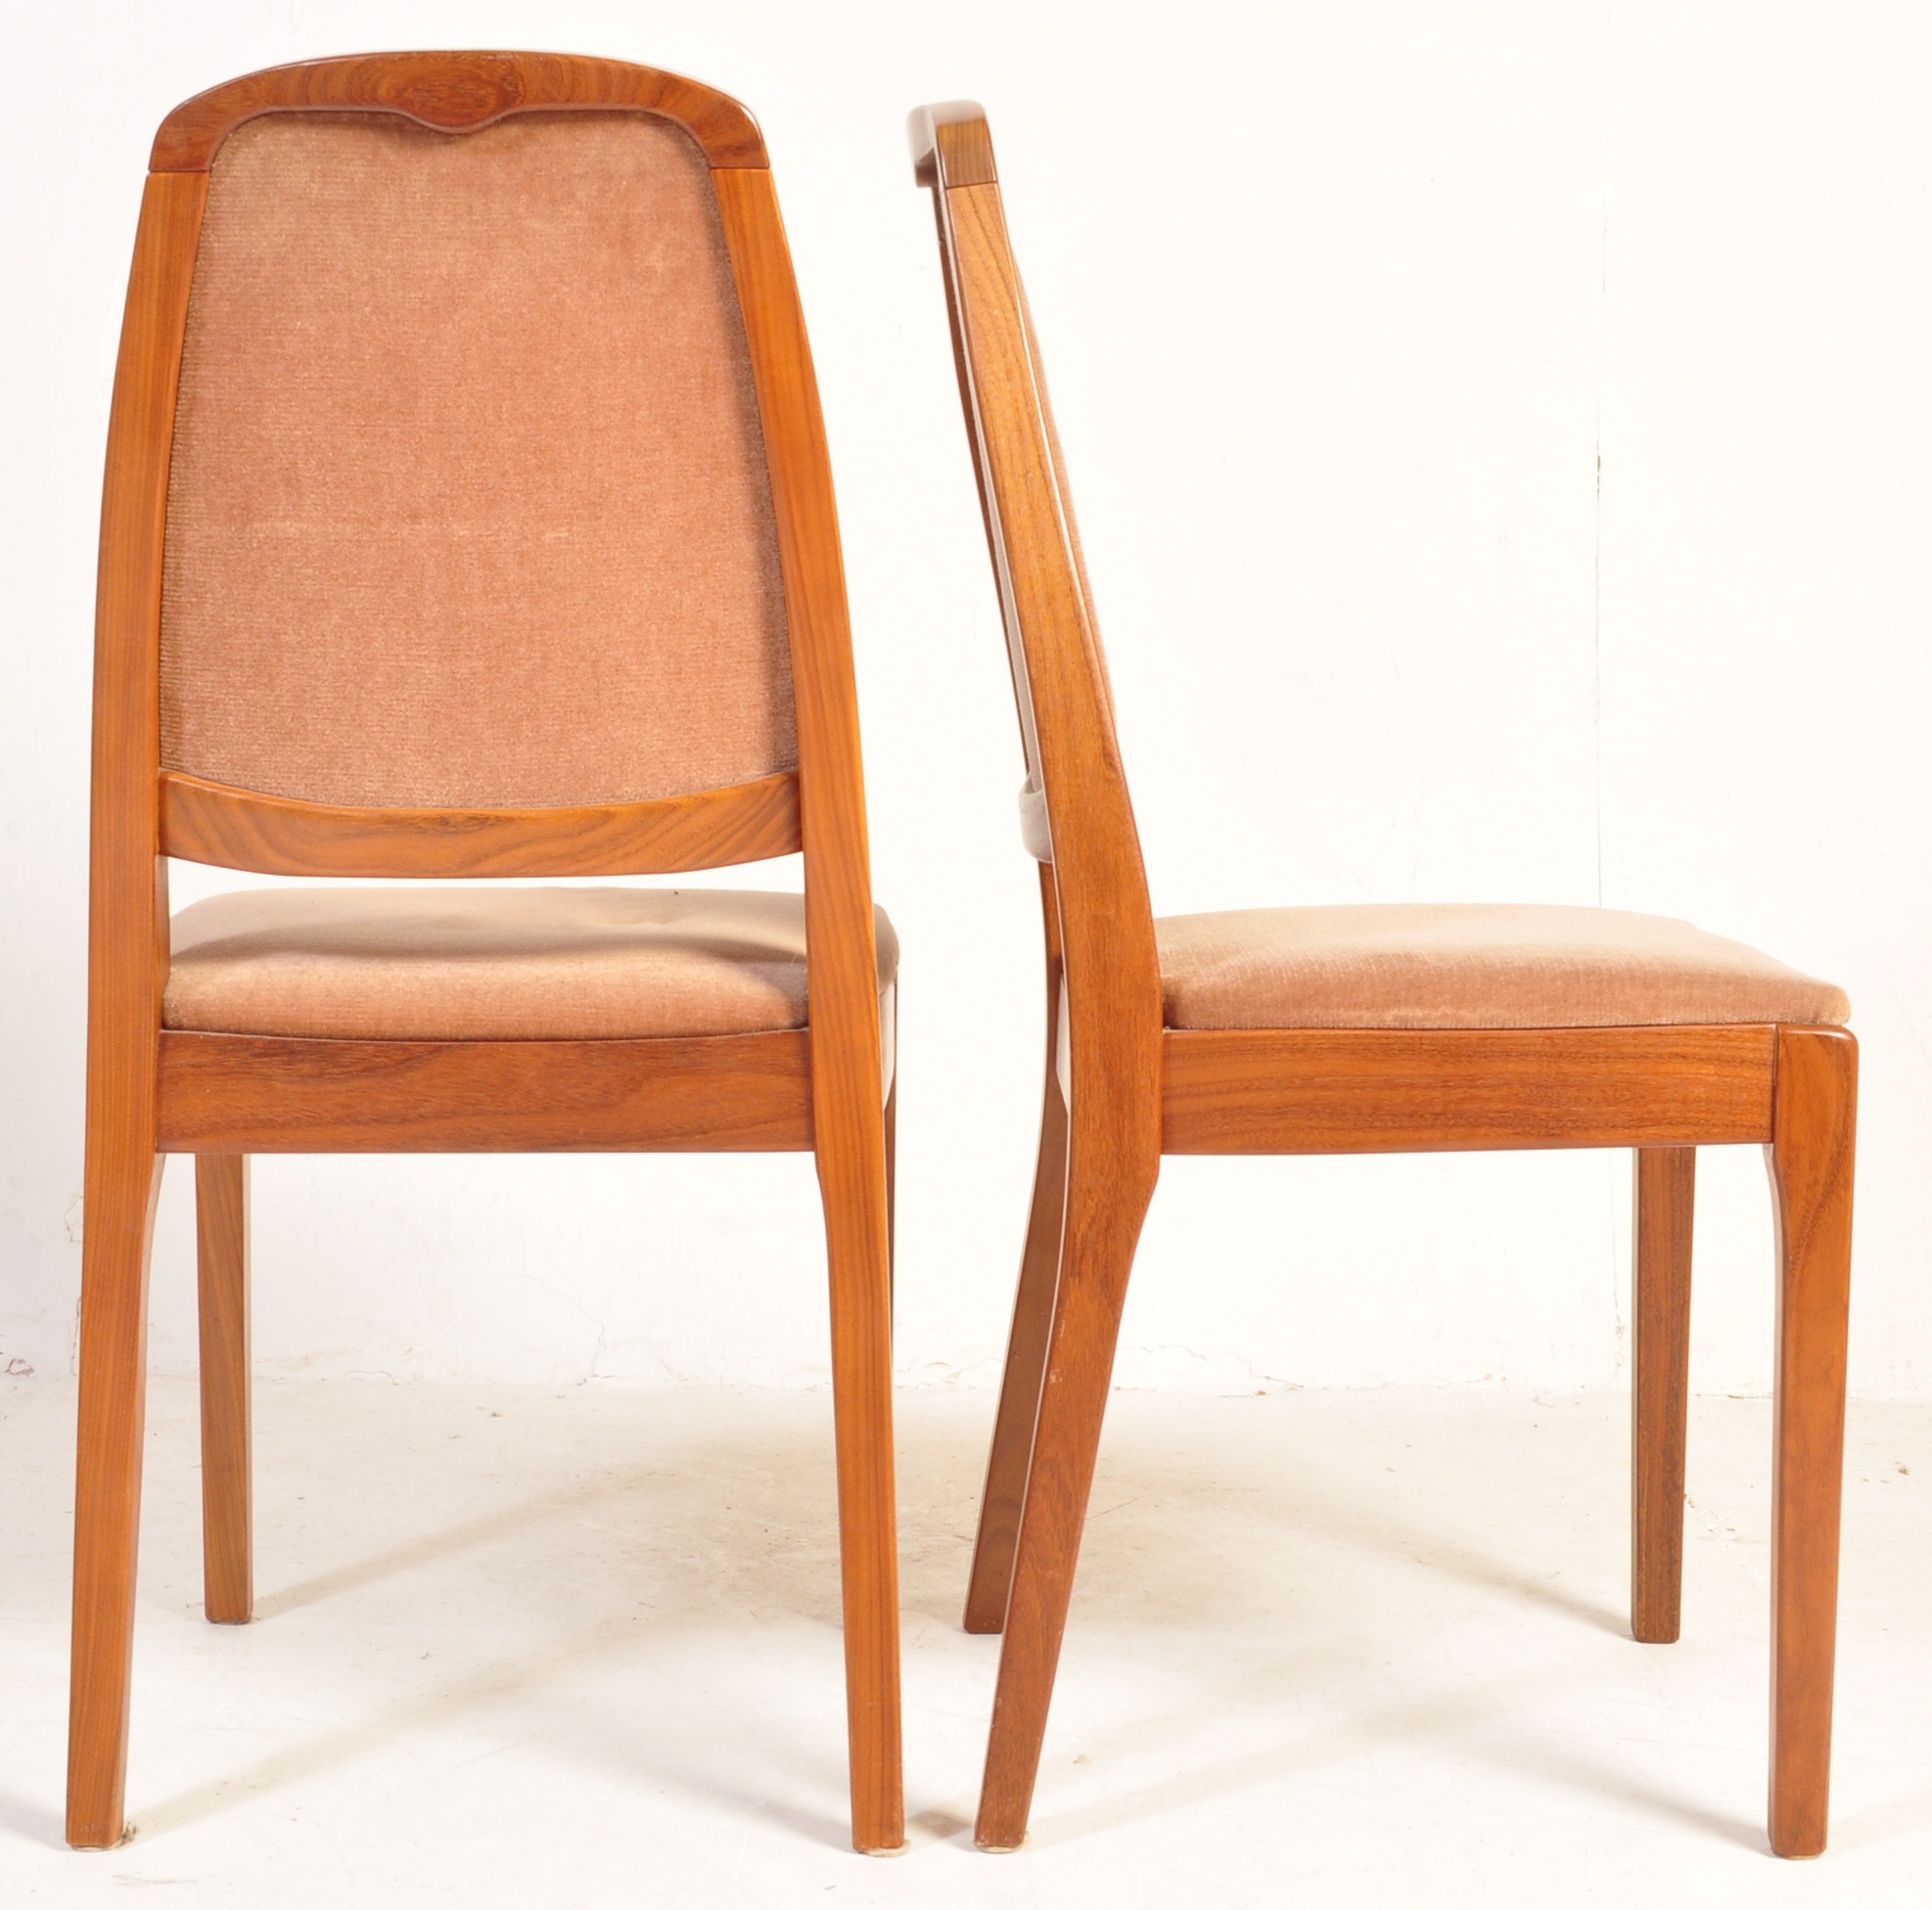 PARKER KNOLL TEAK EXTENDABLE DINING TABLE AND CHAIRS - Image 11 of 14